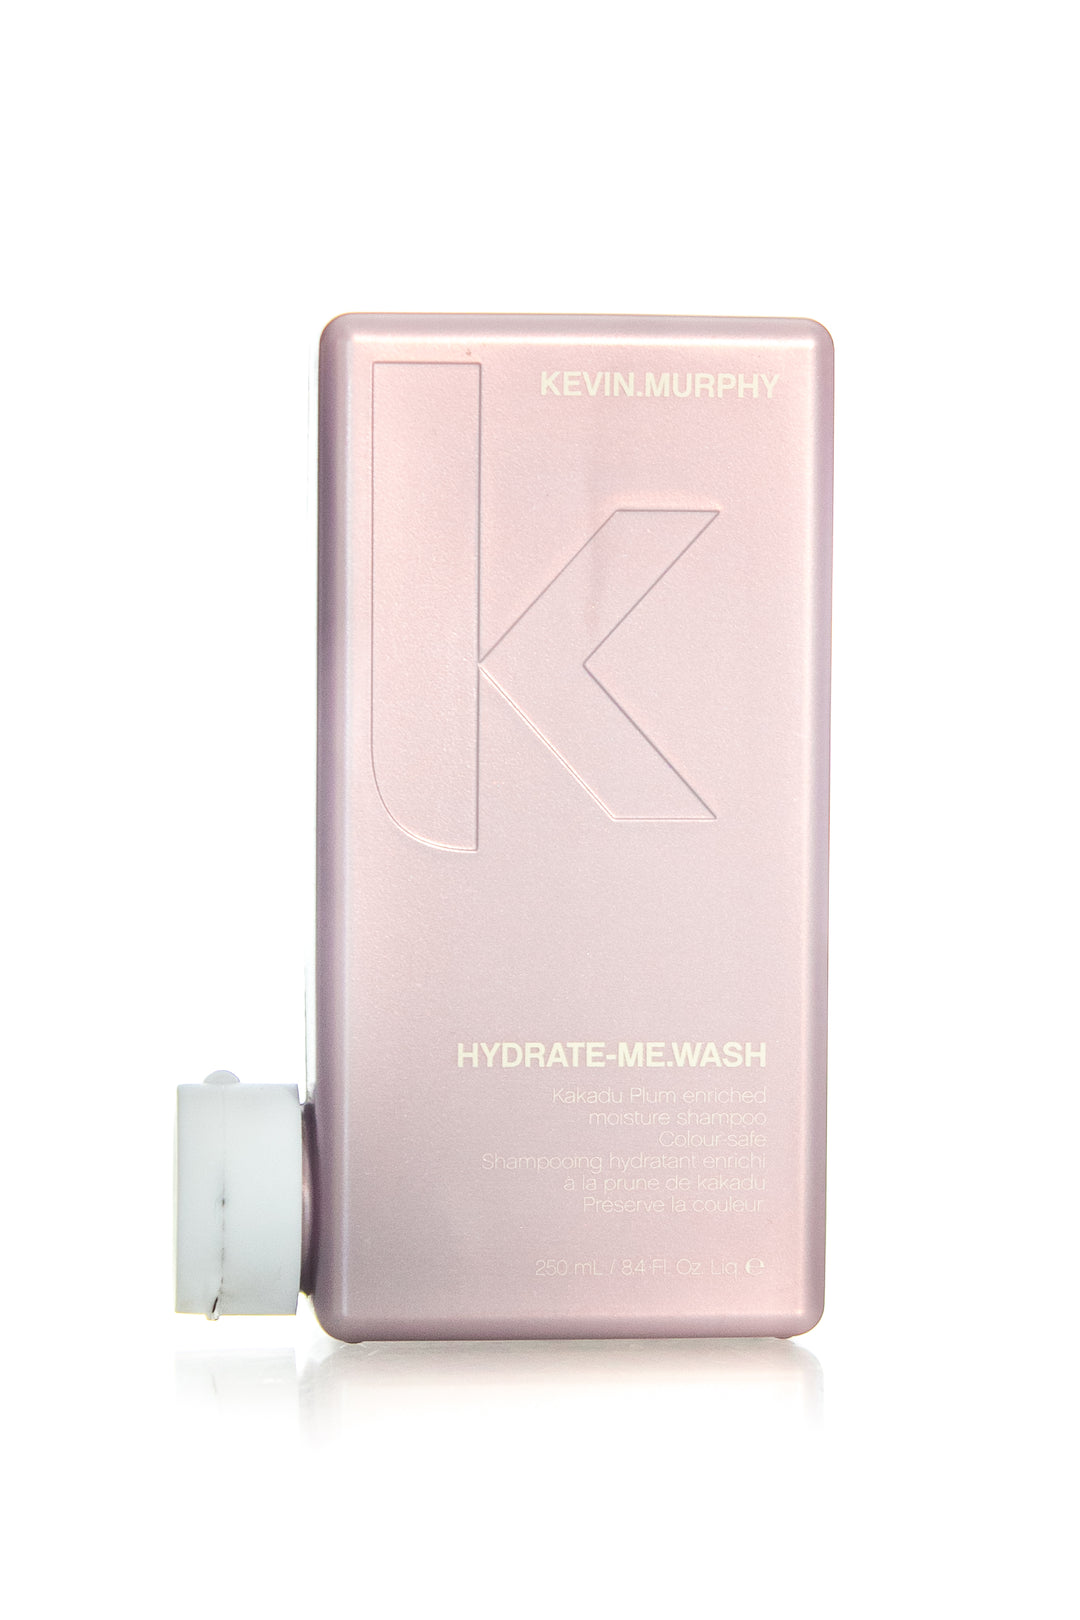 KEVIN MURPHY Hydrate Me Wash | 250ml